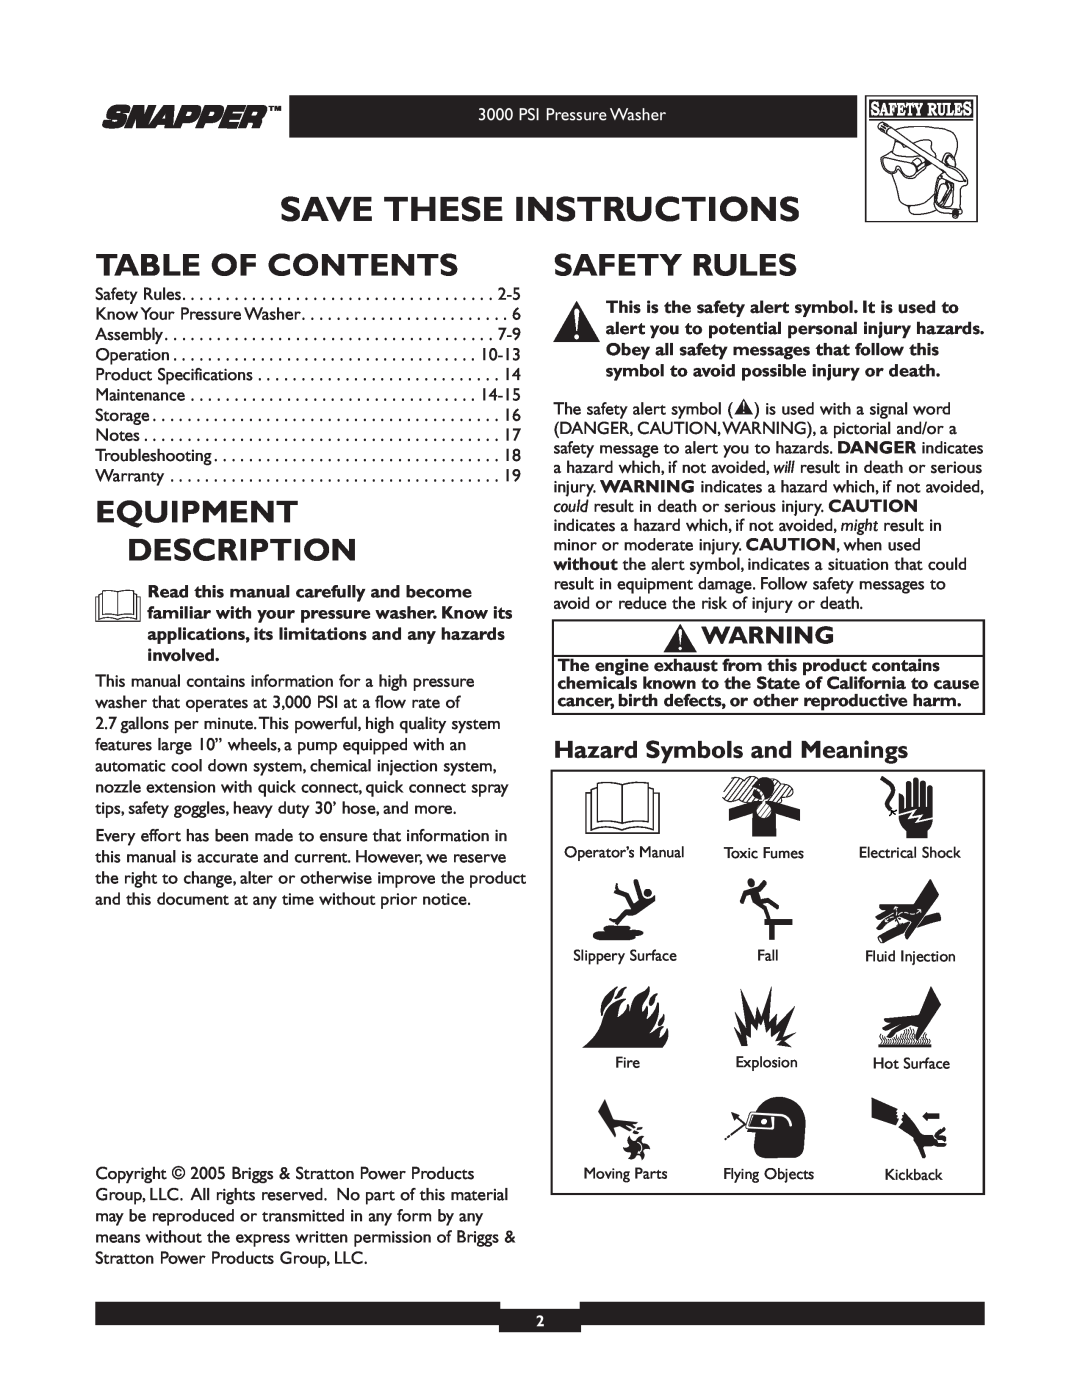 Snapper 020231-2 Table Of Contents, Equipment Description, Safety Rules, Hazard Symbols and Meanings, PSI Pressure Washer 